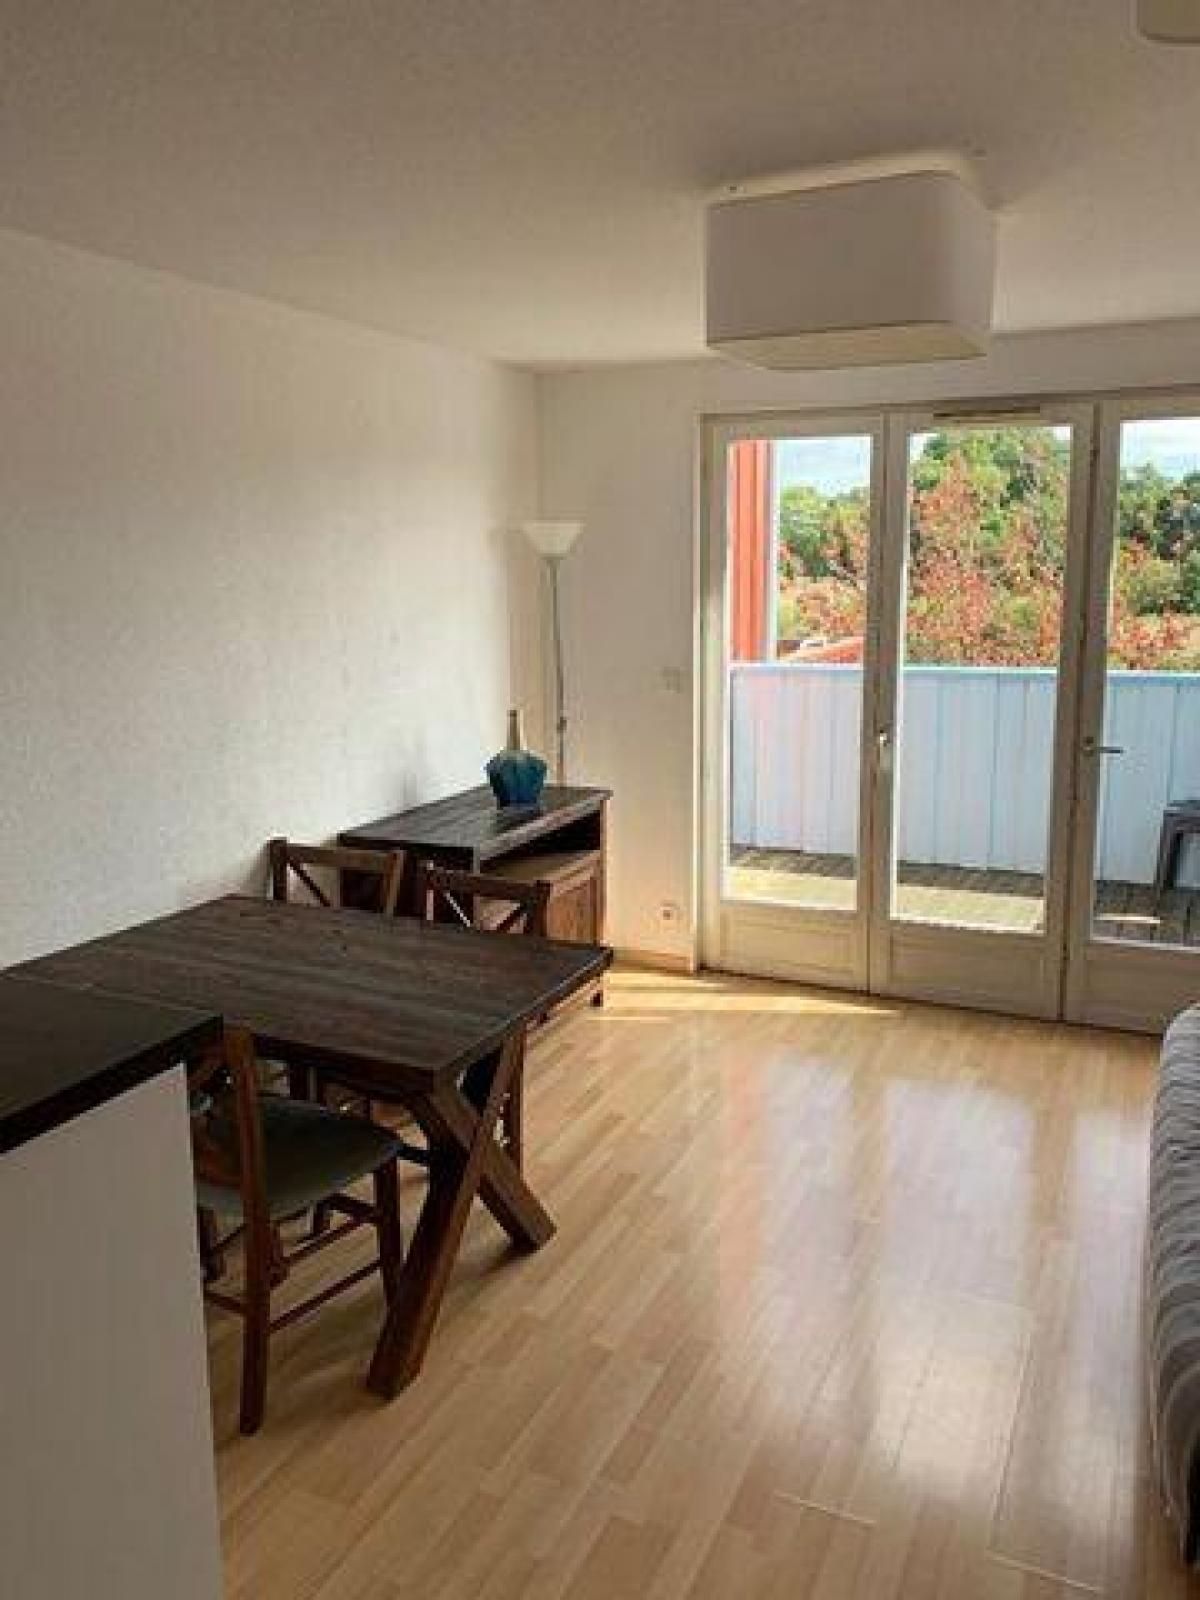 Picture of Apartment For Sale in Le Teich, Aquitaine, France